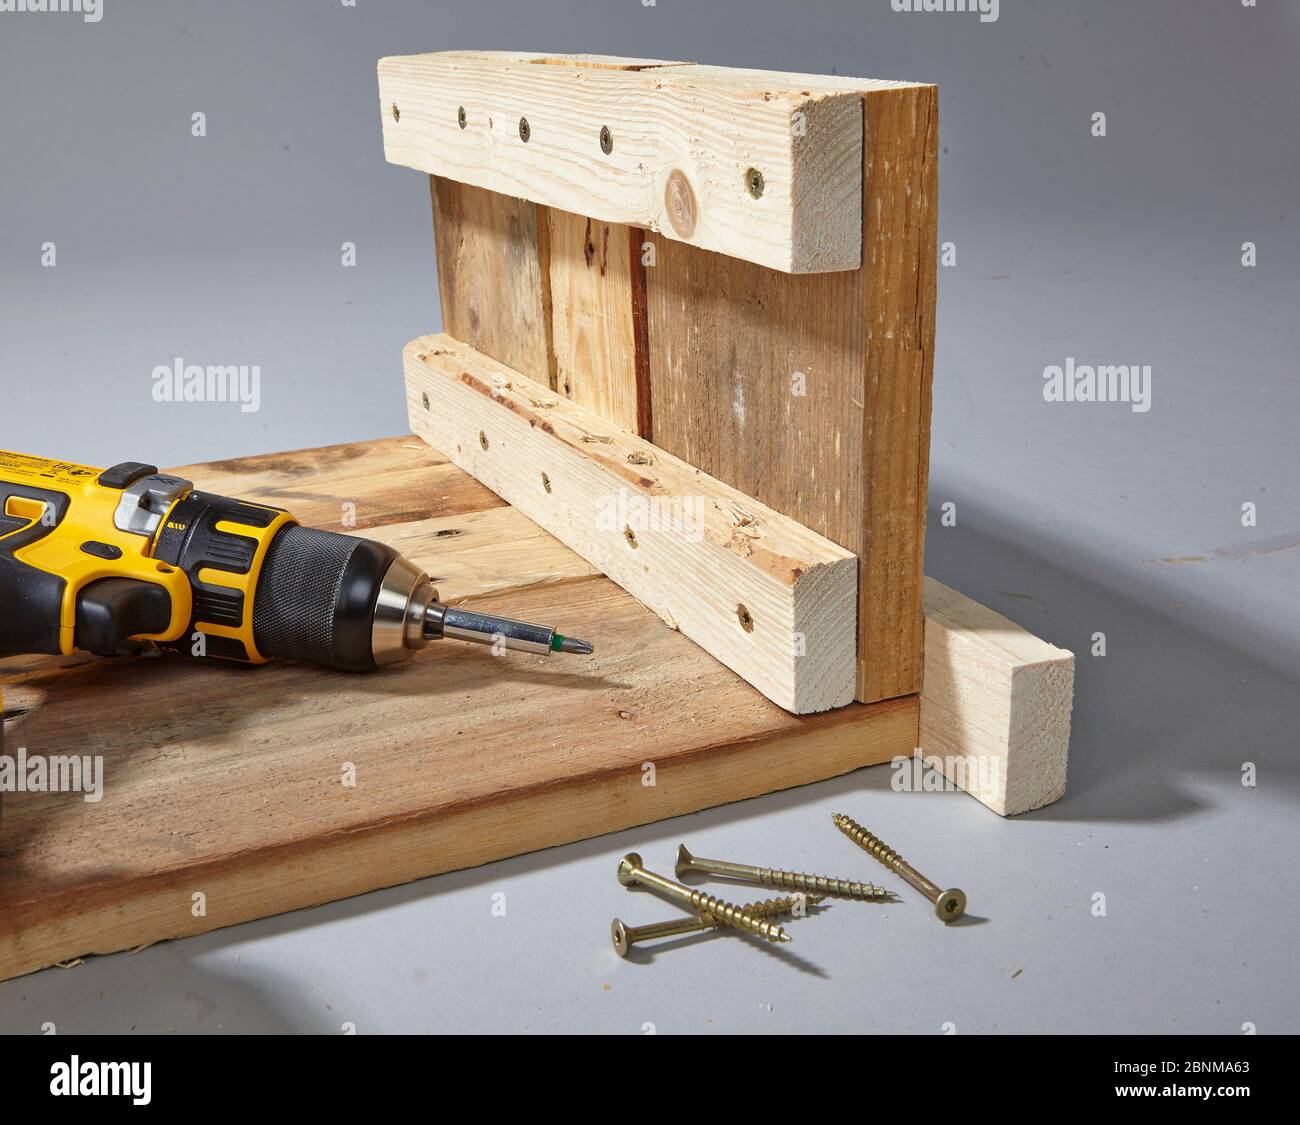 Construction of a shelf made of wood, Euro pallet, solid wood, MDF board; Do-it-yourself production, step-by-step, step 5 connecting the elements with screws, cordless screwdriver Stock Photo